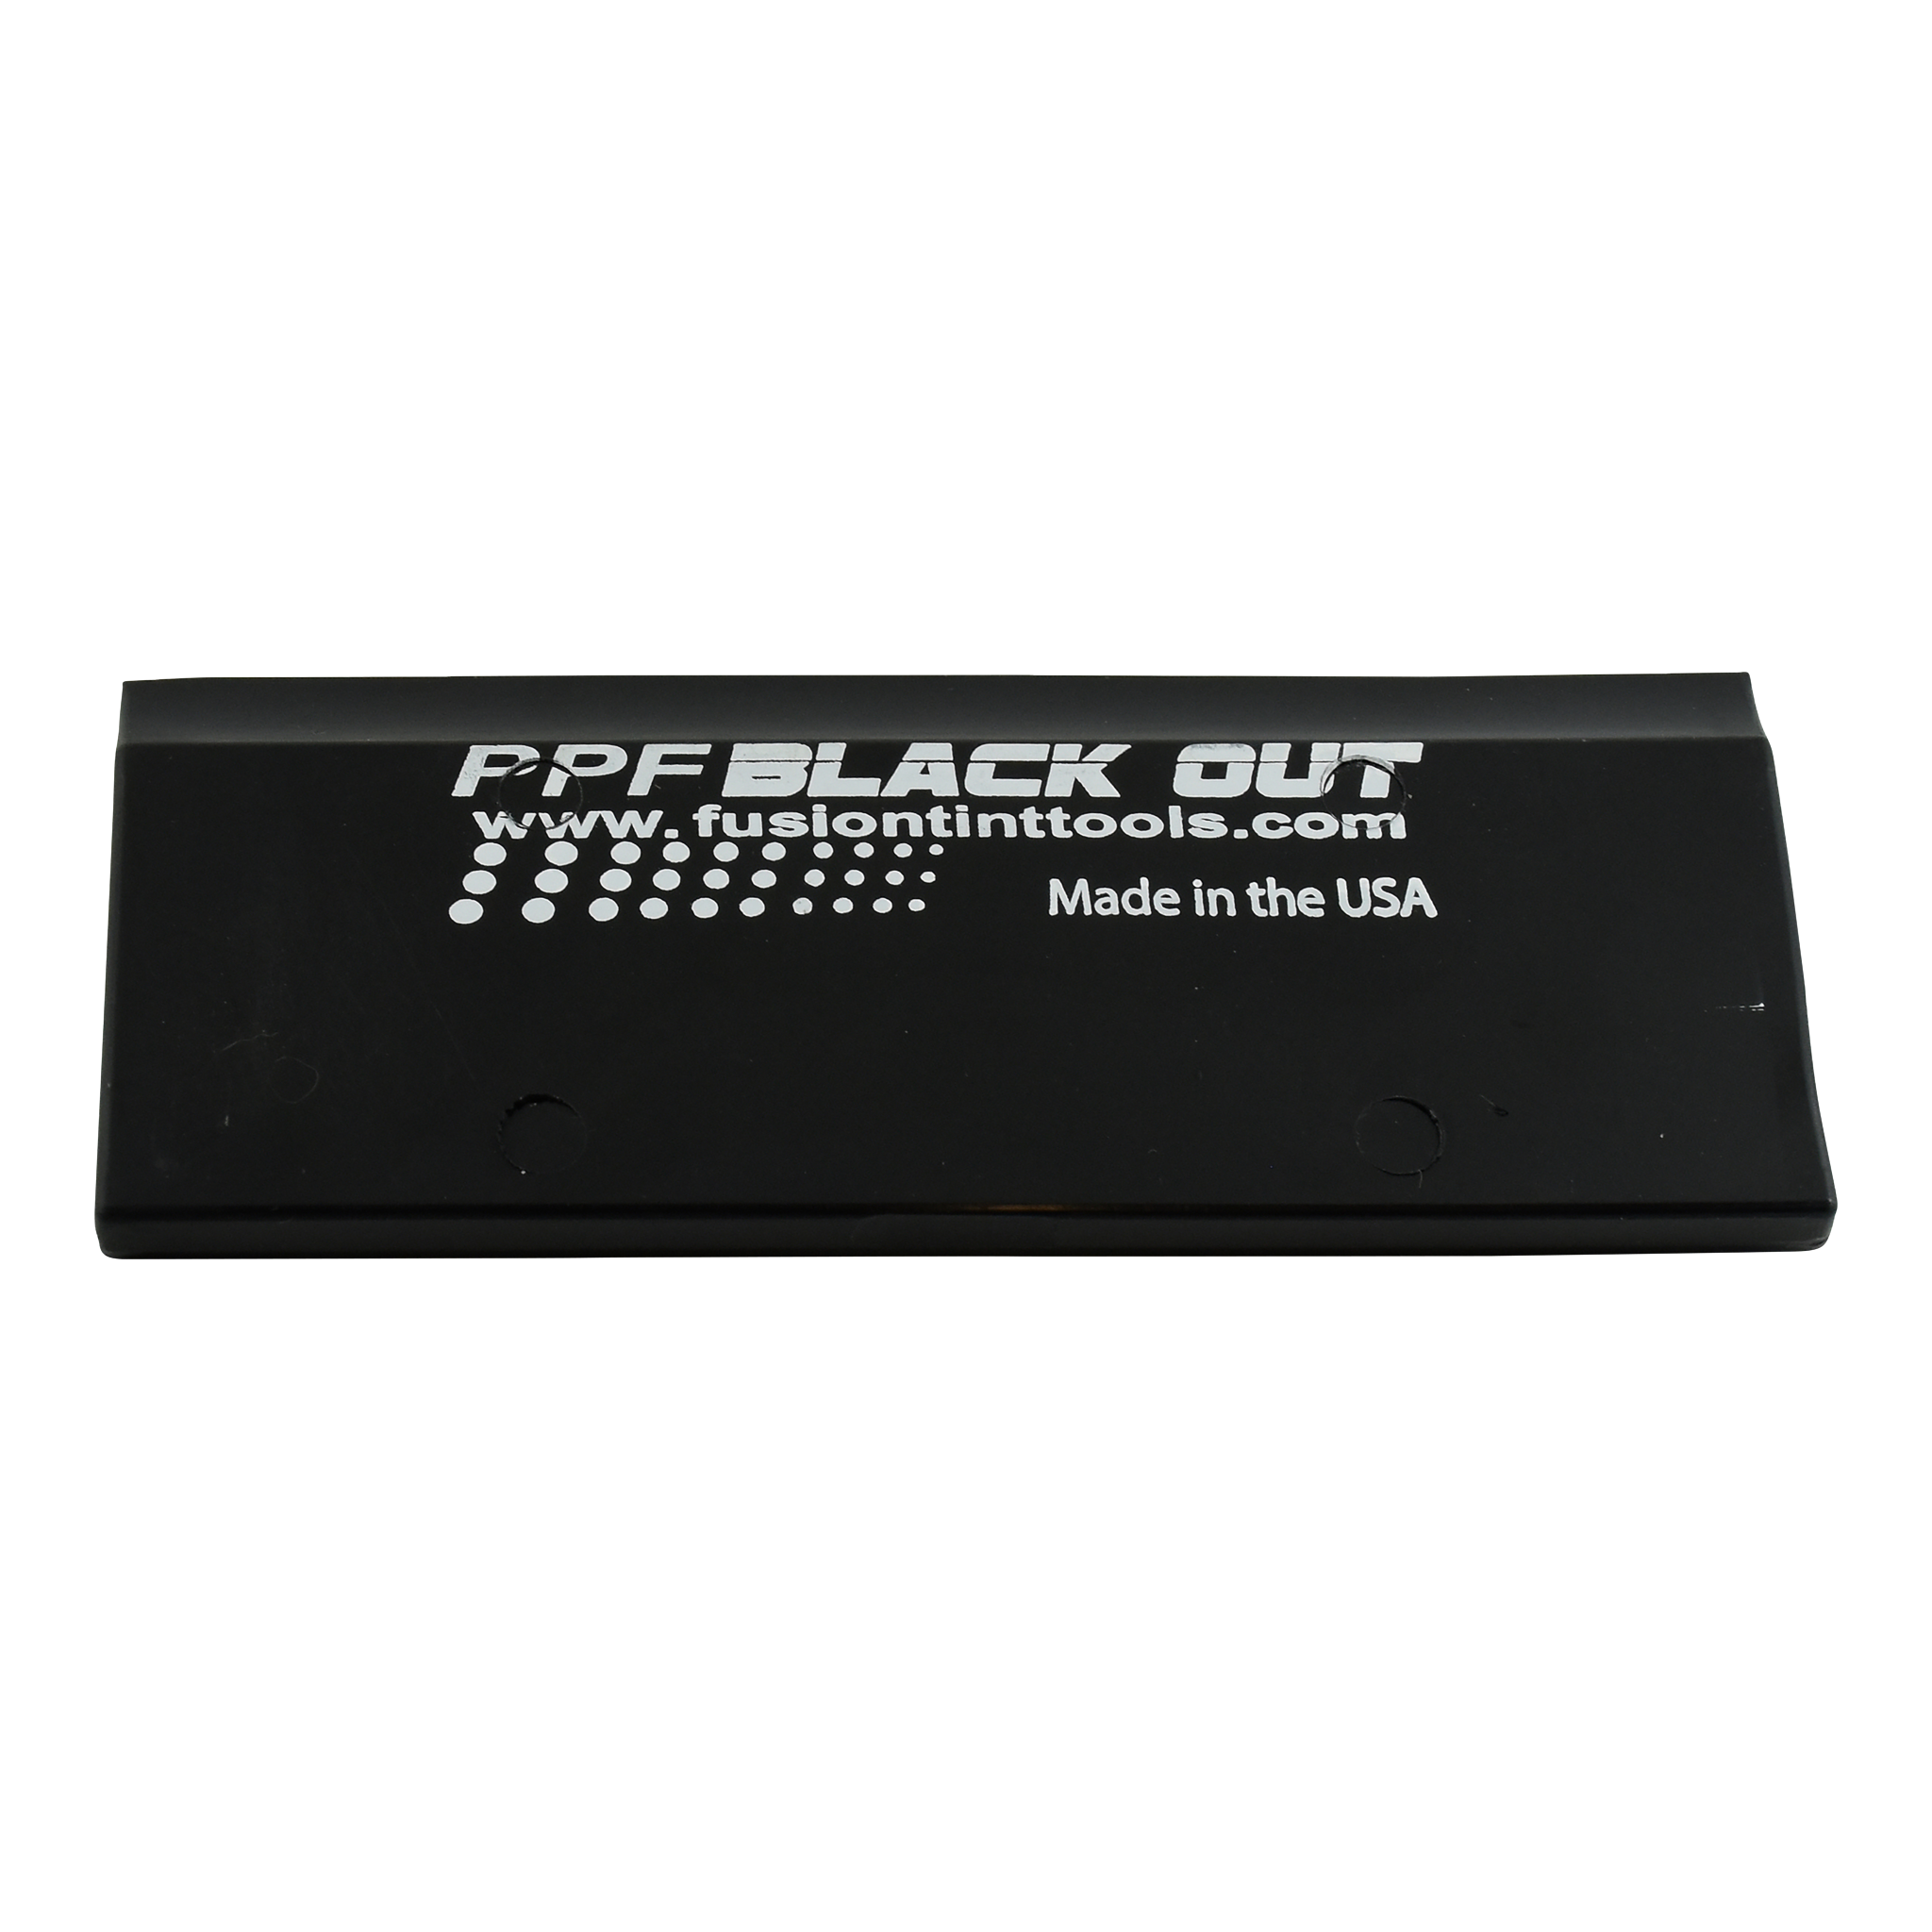 5 PPF Blackout Cropped Squeegee for paint protection film